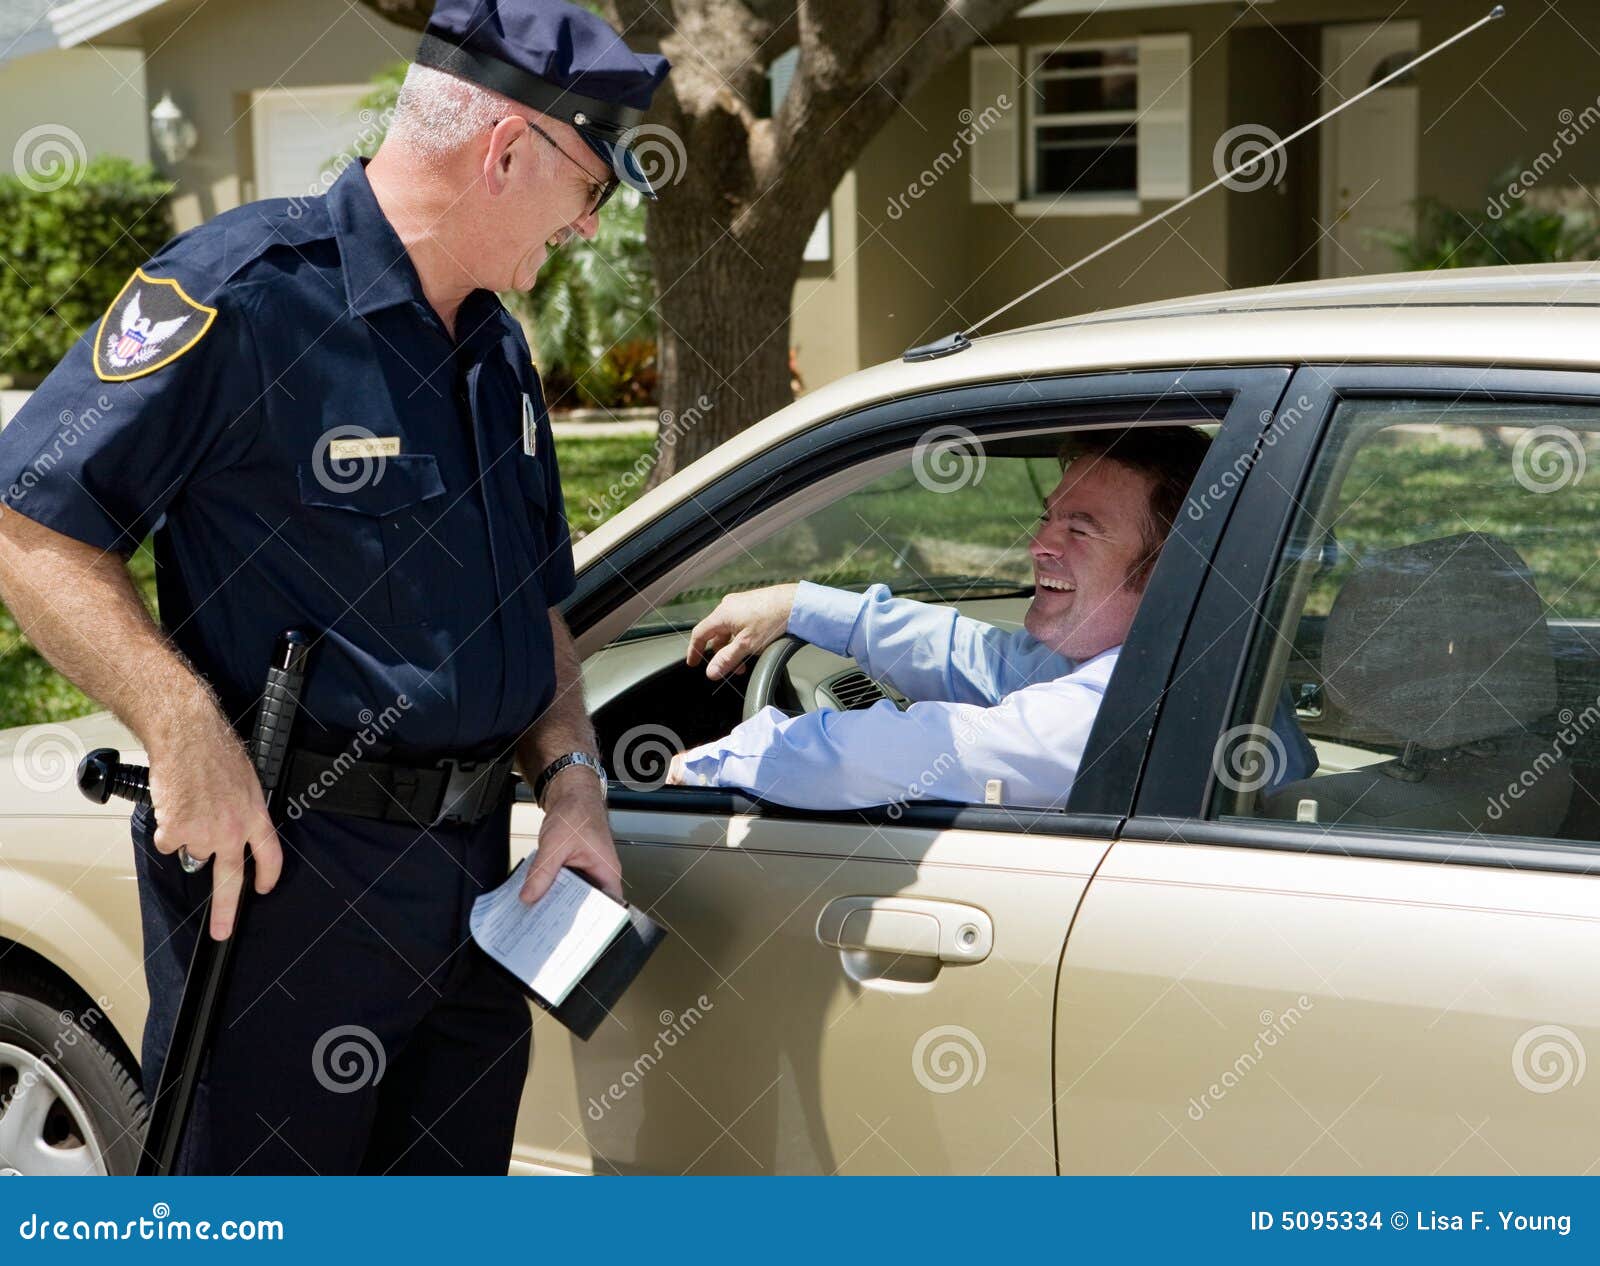 Police - Friendly Traffic Stop Stock Images - Image: 5095334